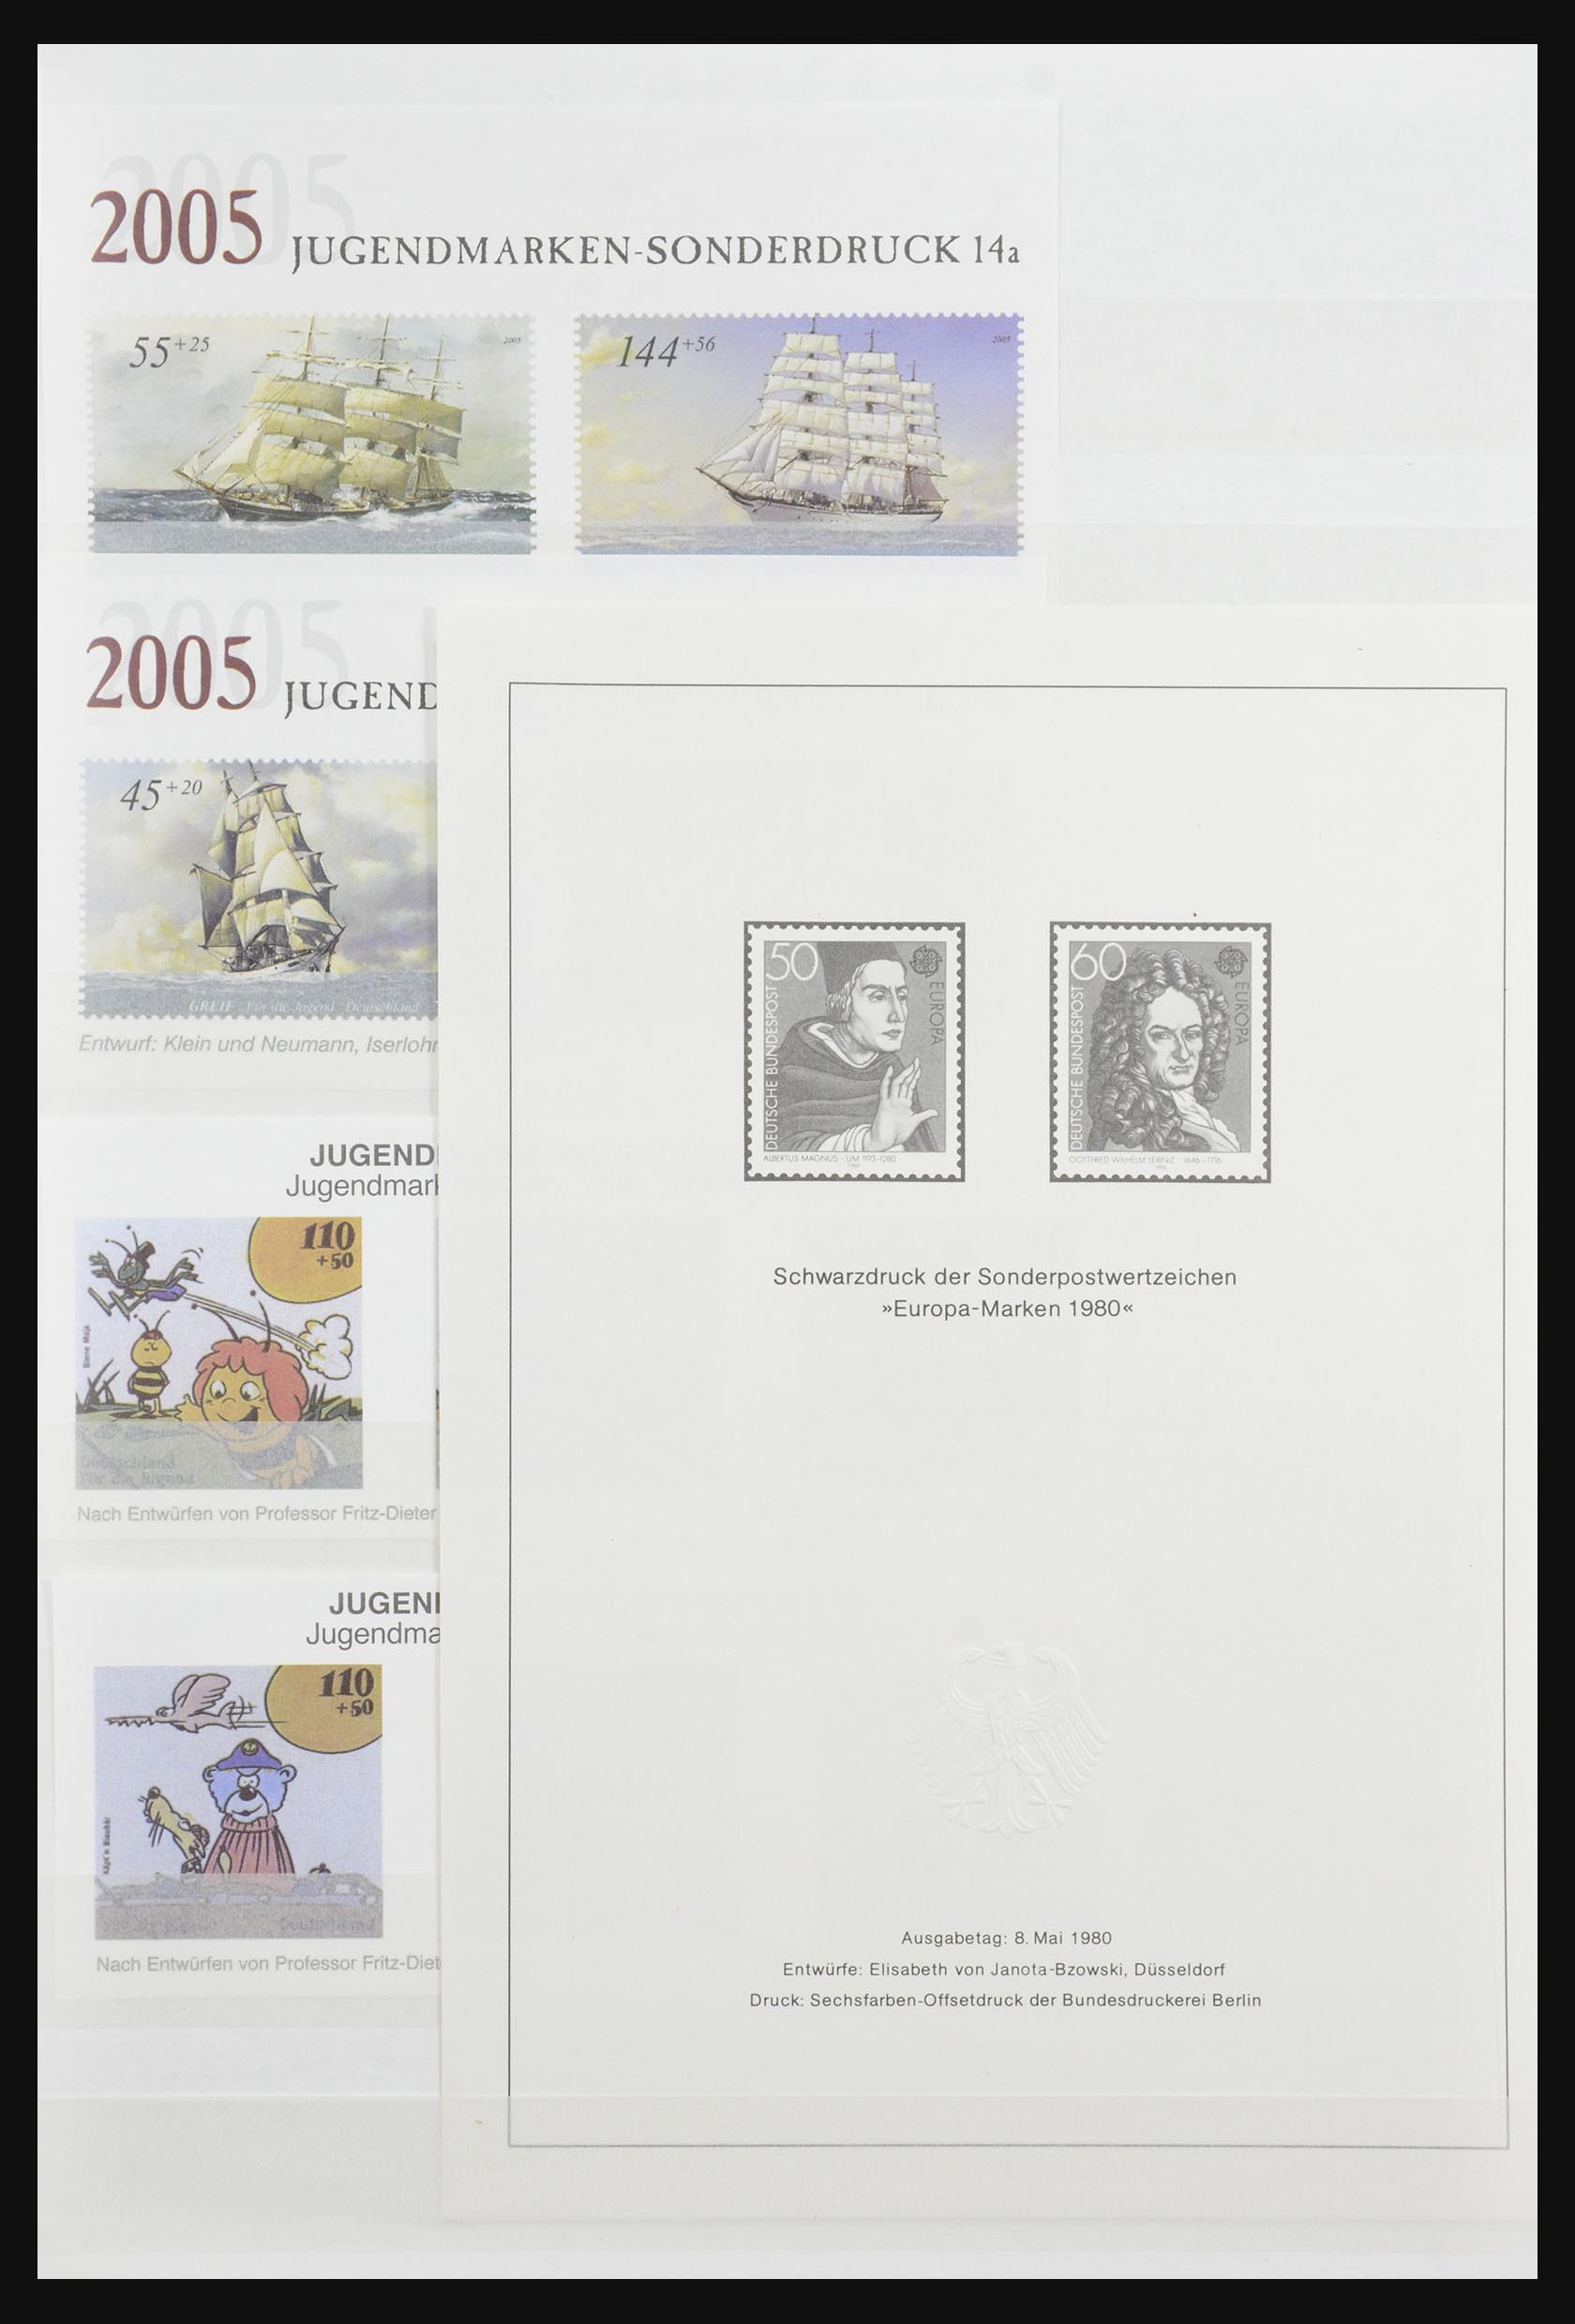 32050 020 - 32050 Bundespost special sheets 1980-2010.